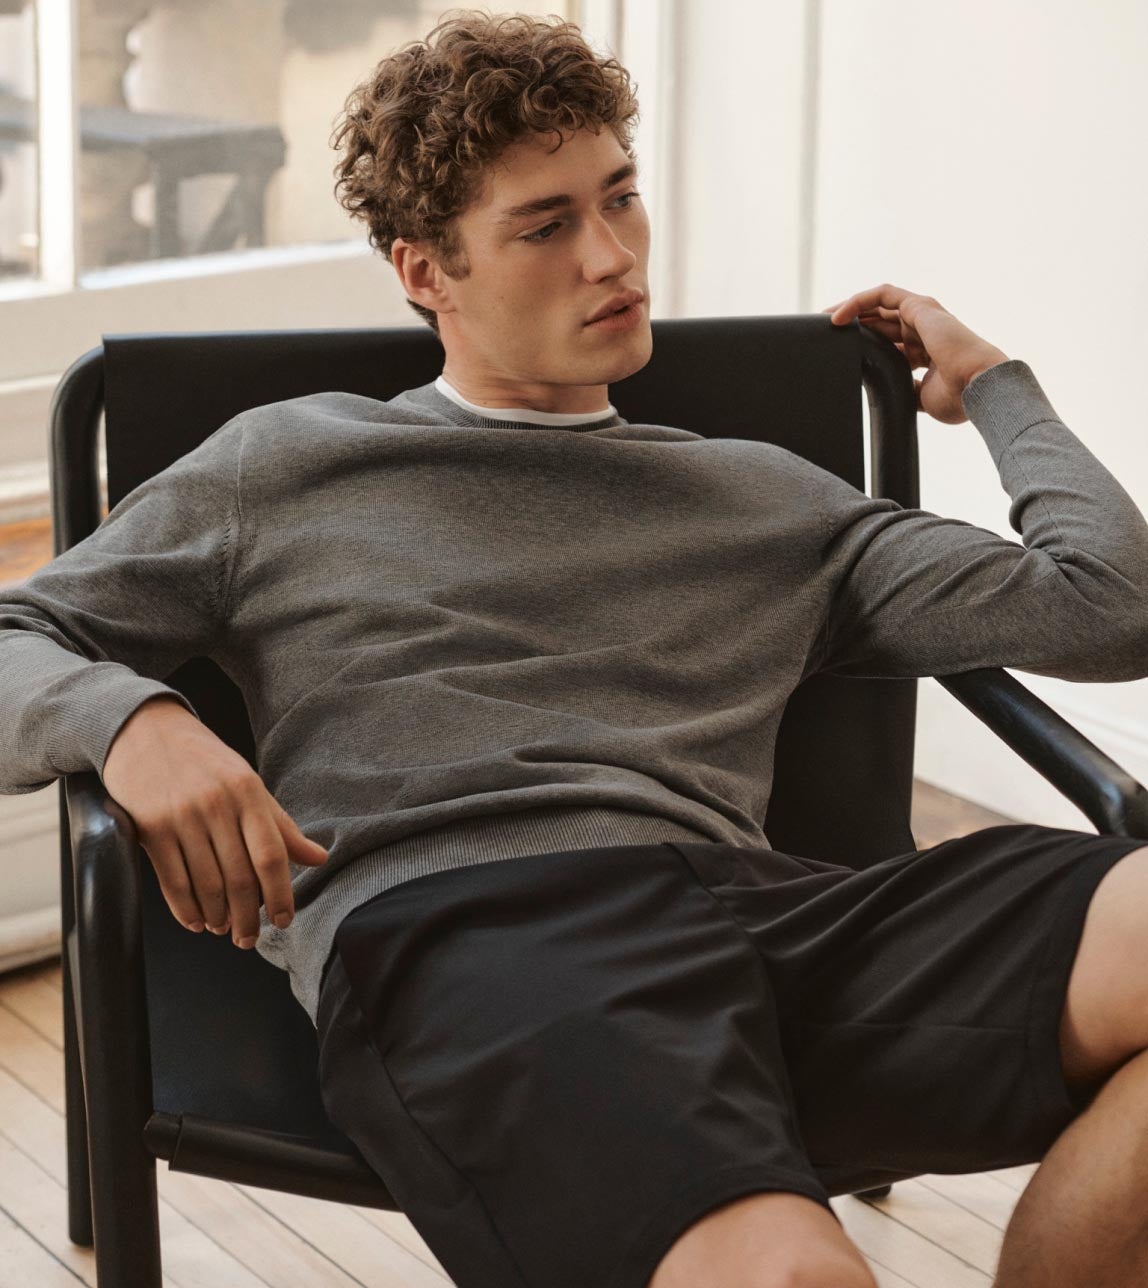 Man leaning back on a chair wearing a grey sweater and black tailored shorts